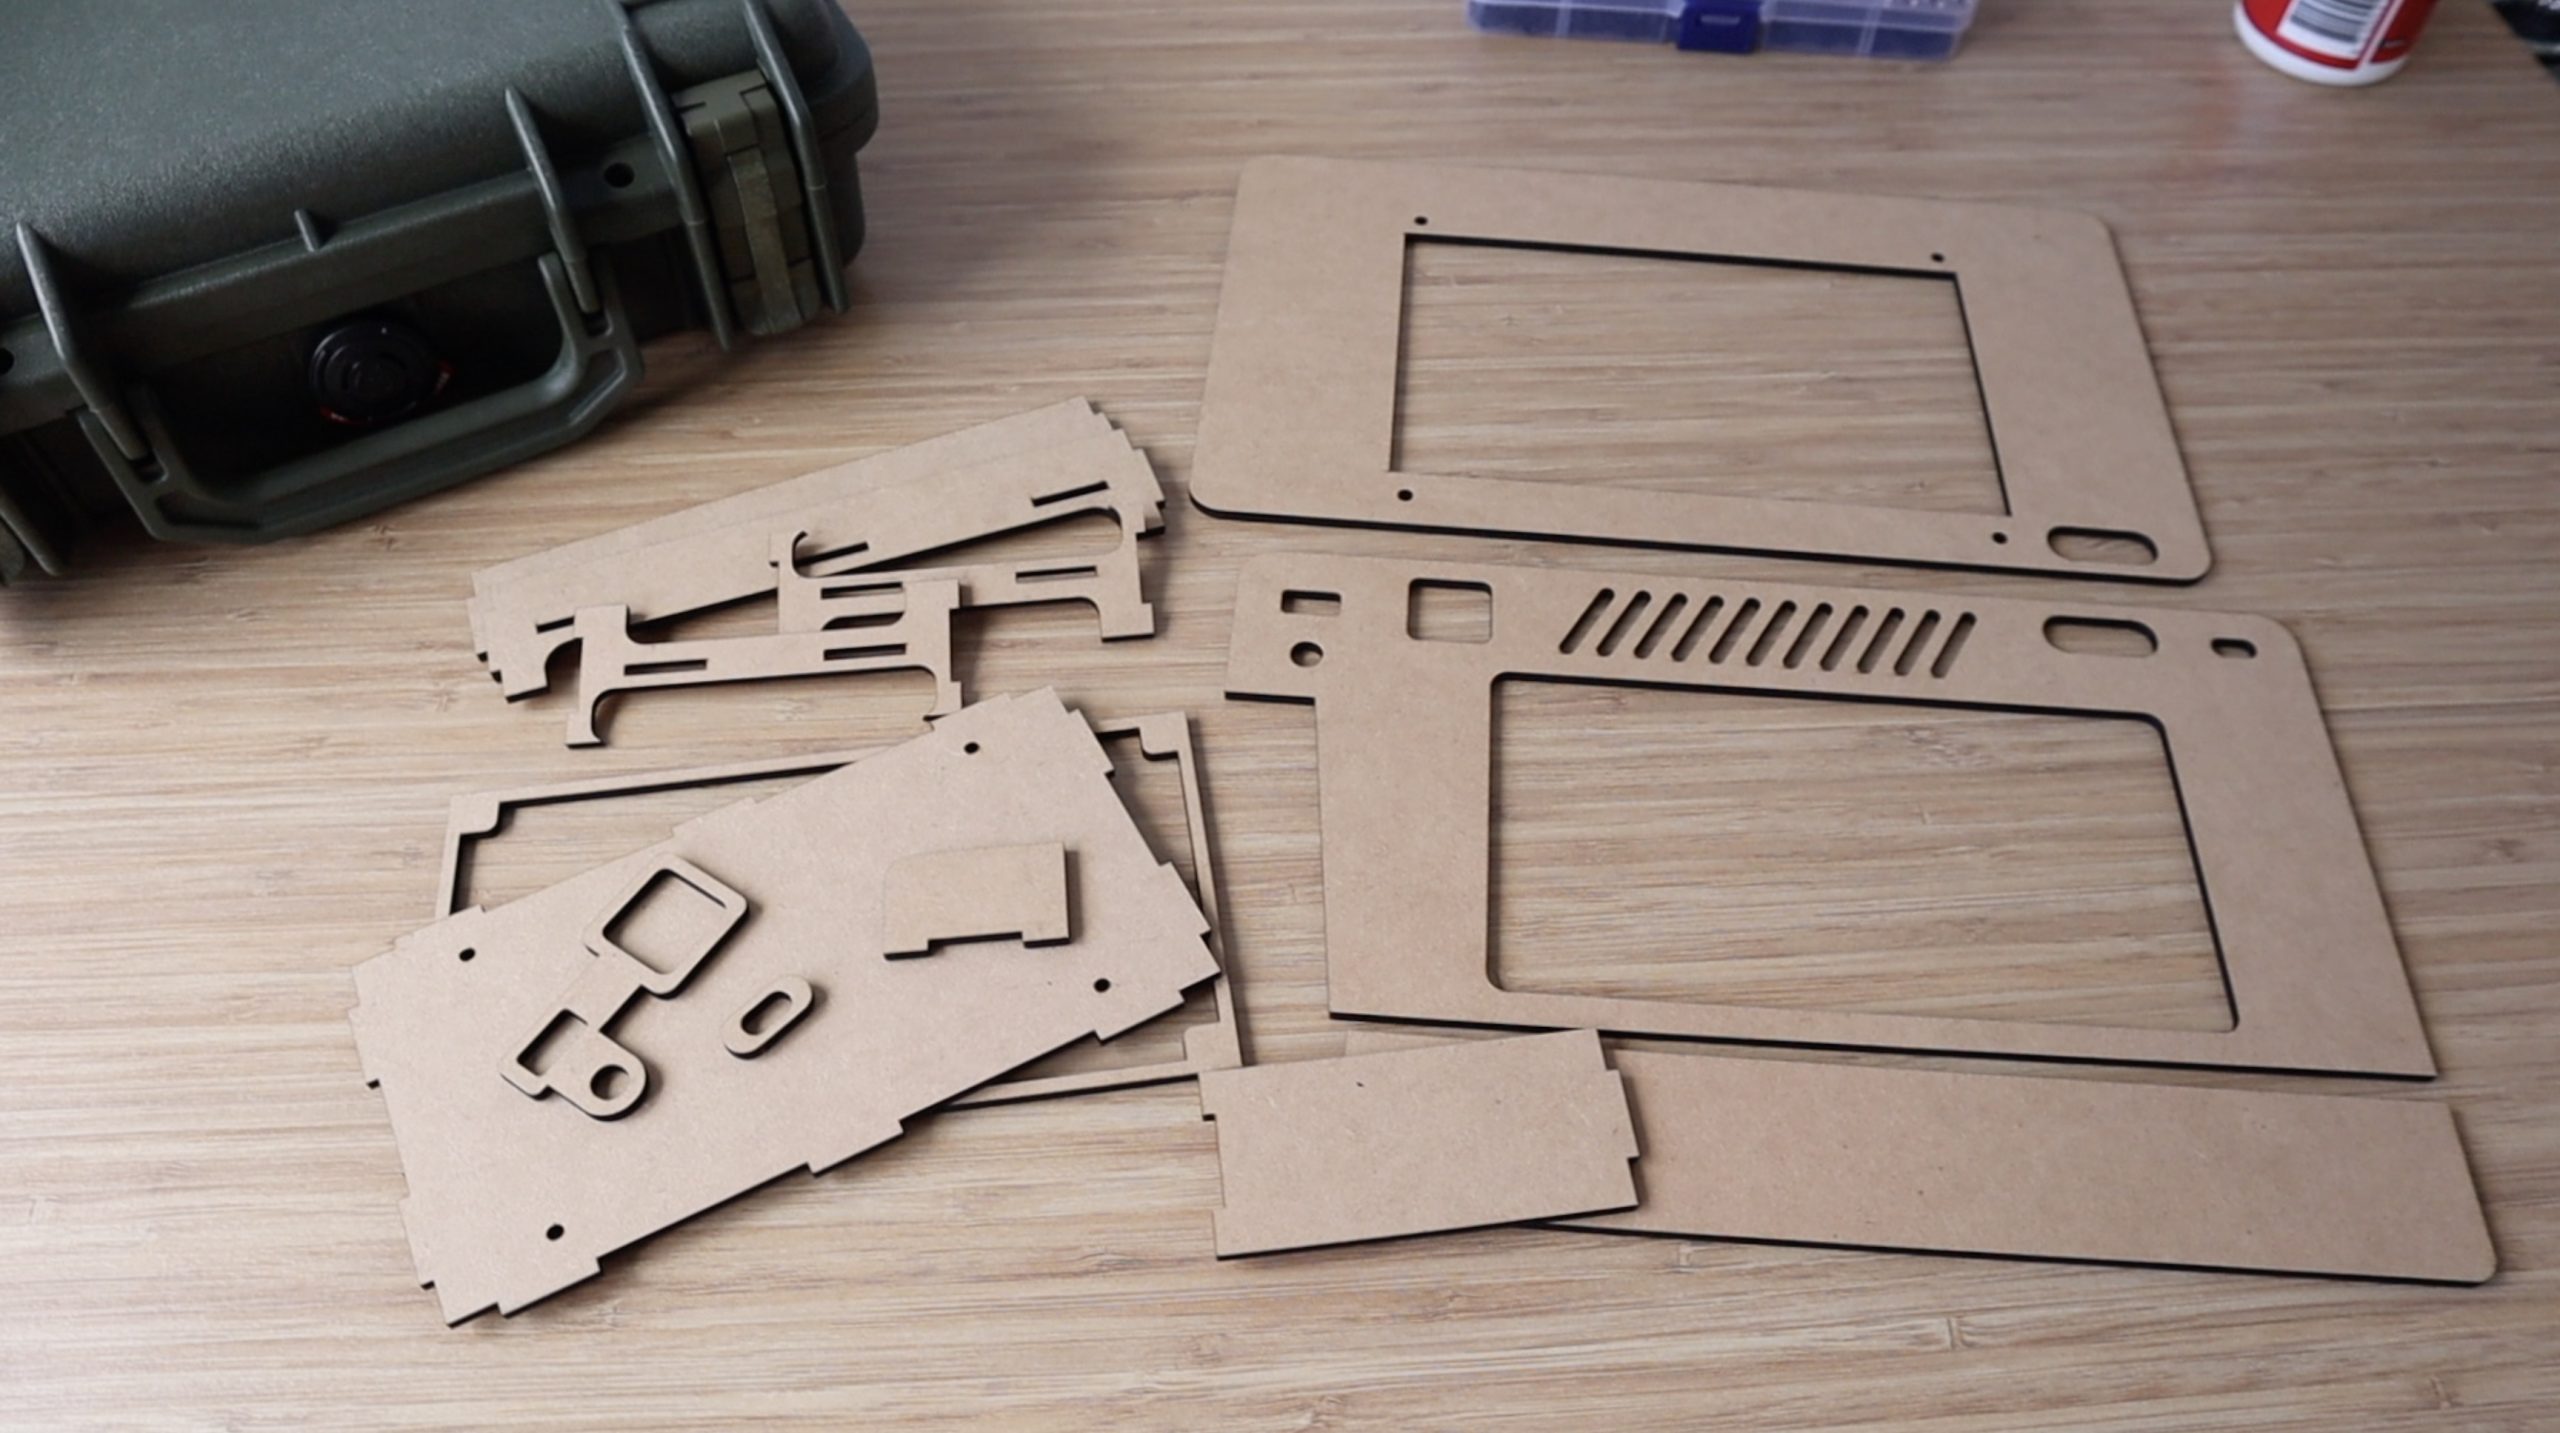 Laser Cut Components For Cyberdeck